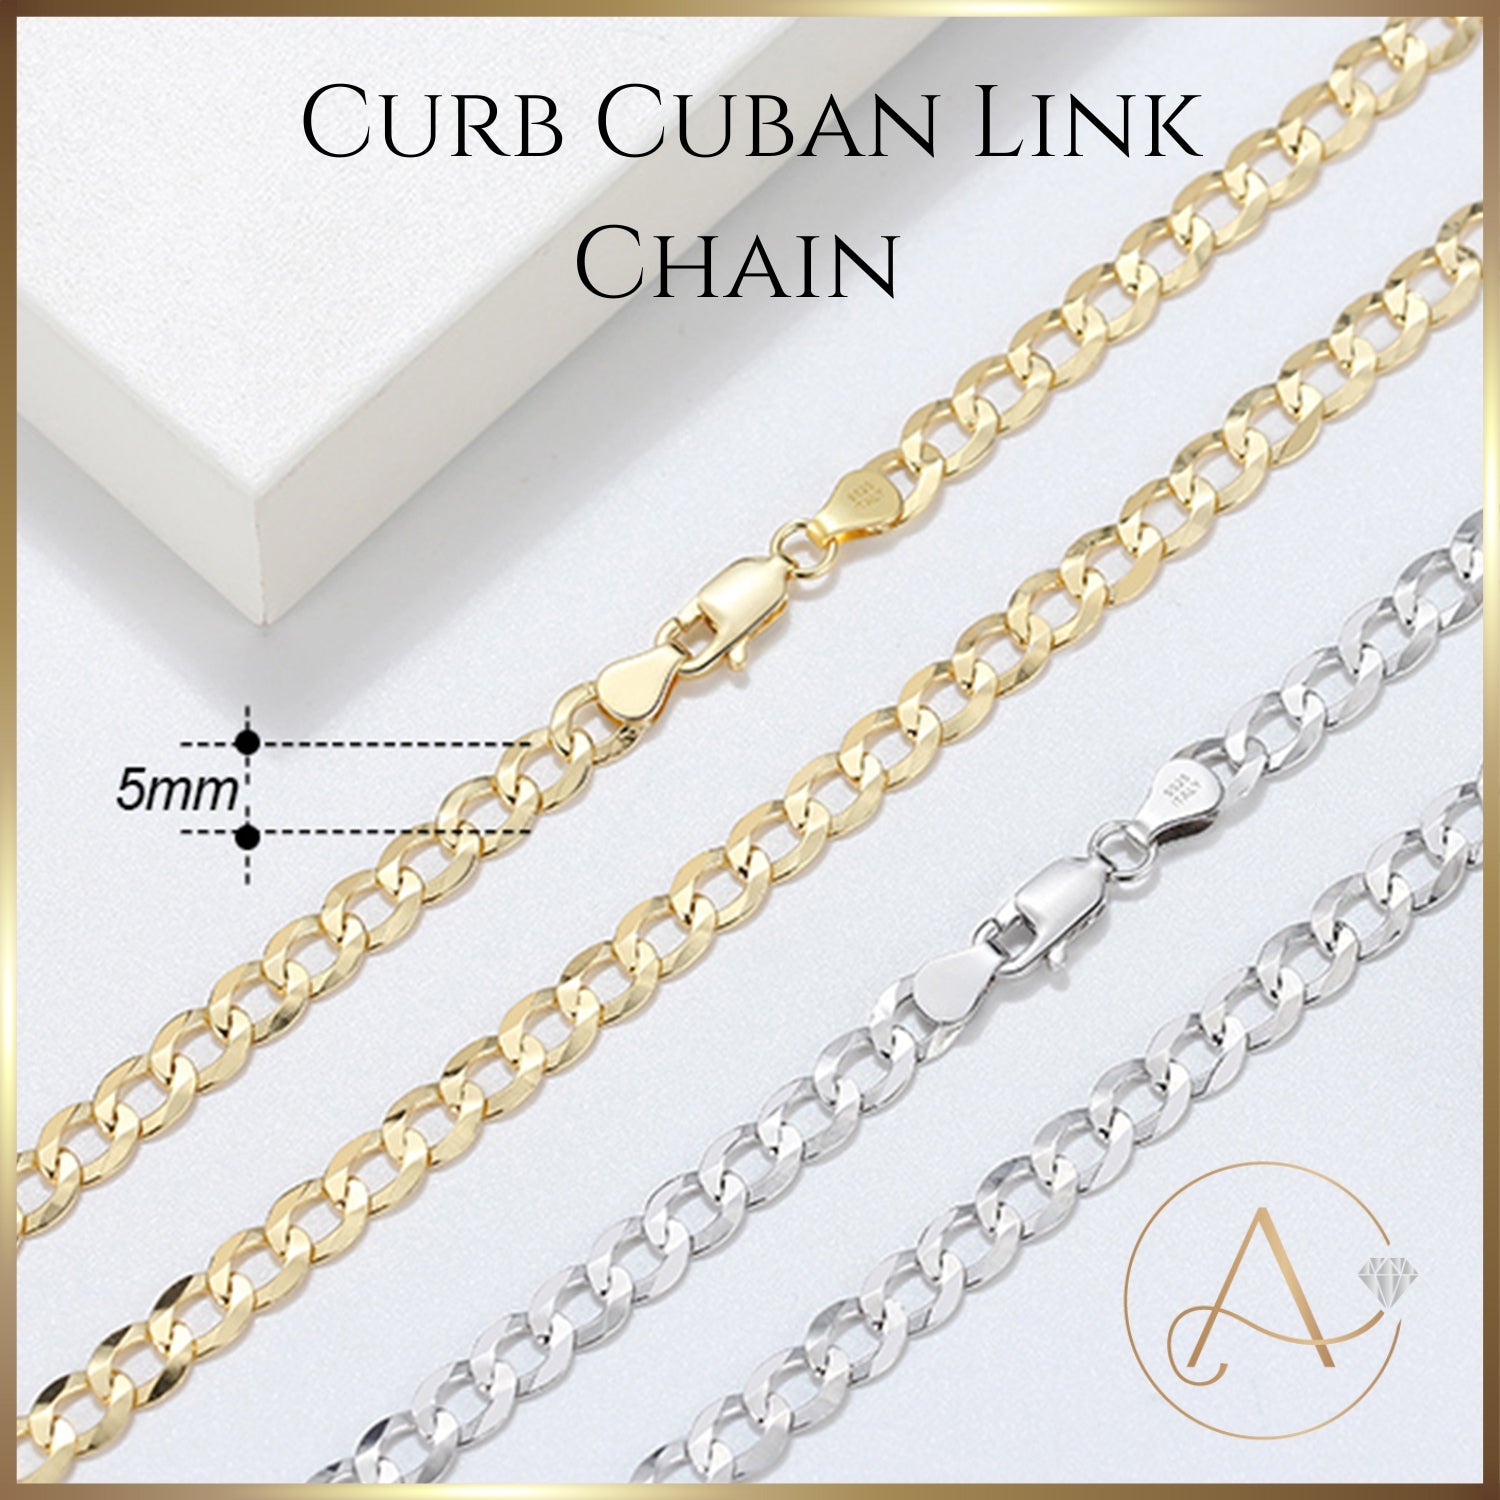 Cuban Curb Link Chain Necklace | 925 Sterling Silver or 18K Yellow Gold Plated - Adora Fine Jewelry